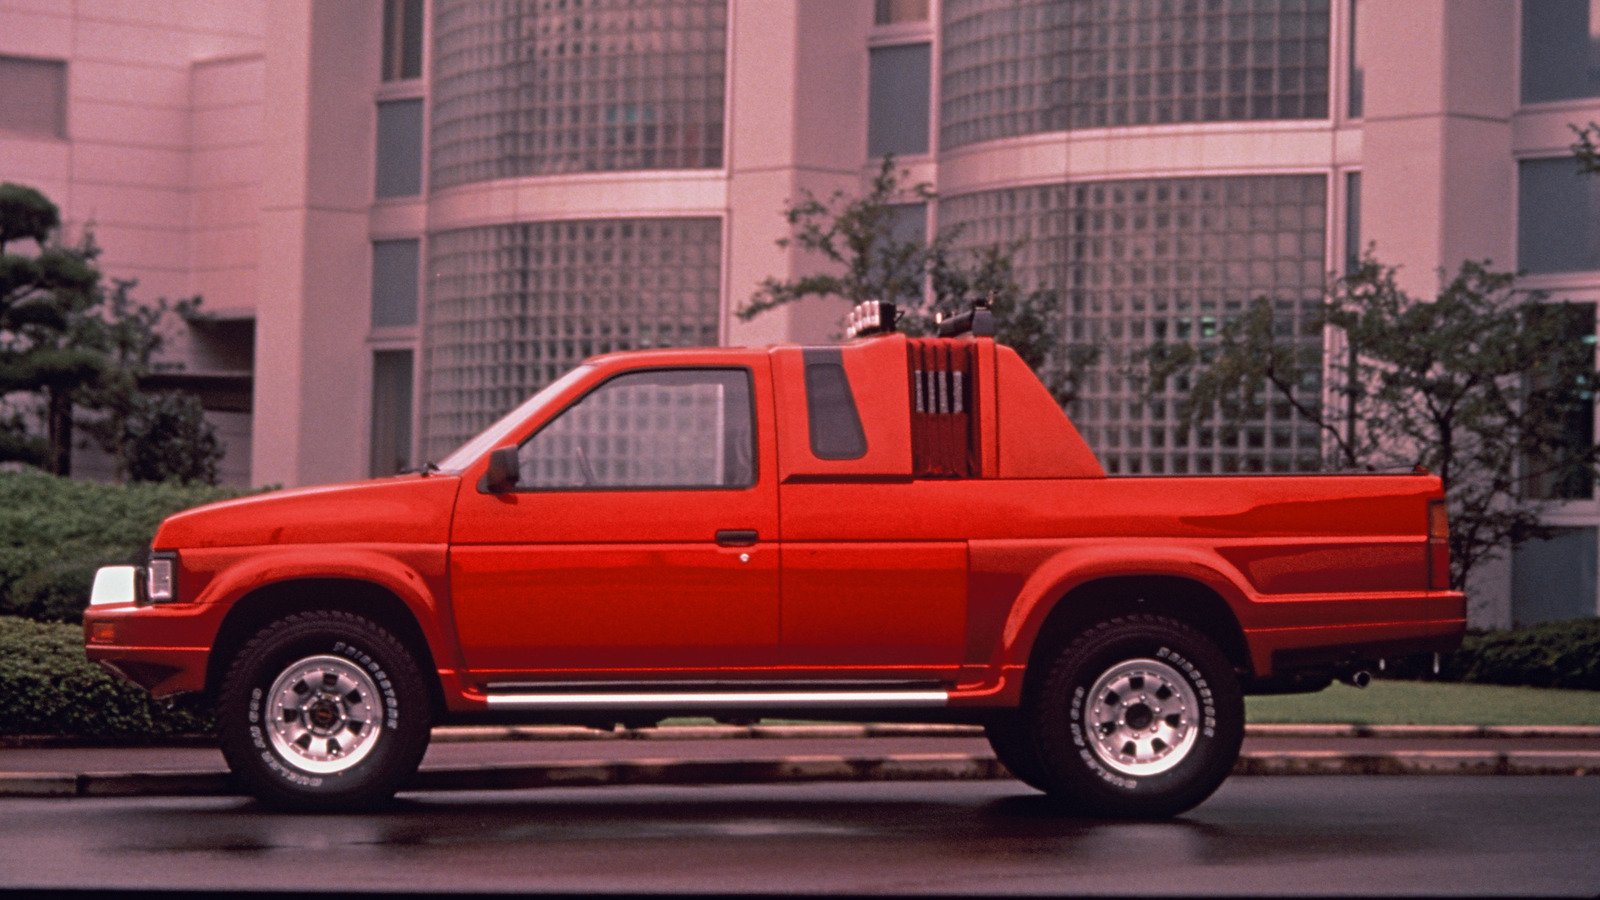 This Strange Nissan Concept Had An Innovative Feature We'd Love To See On A New Truck